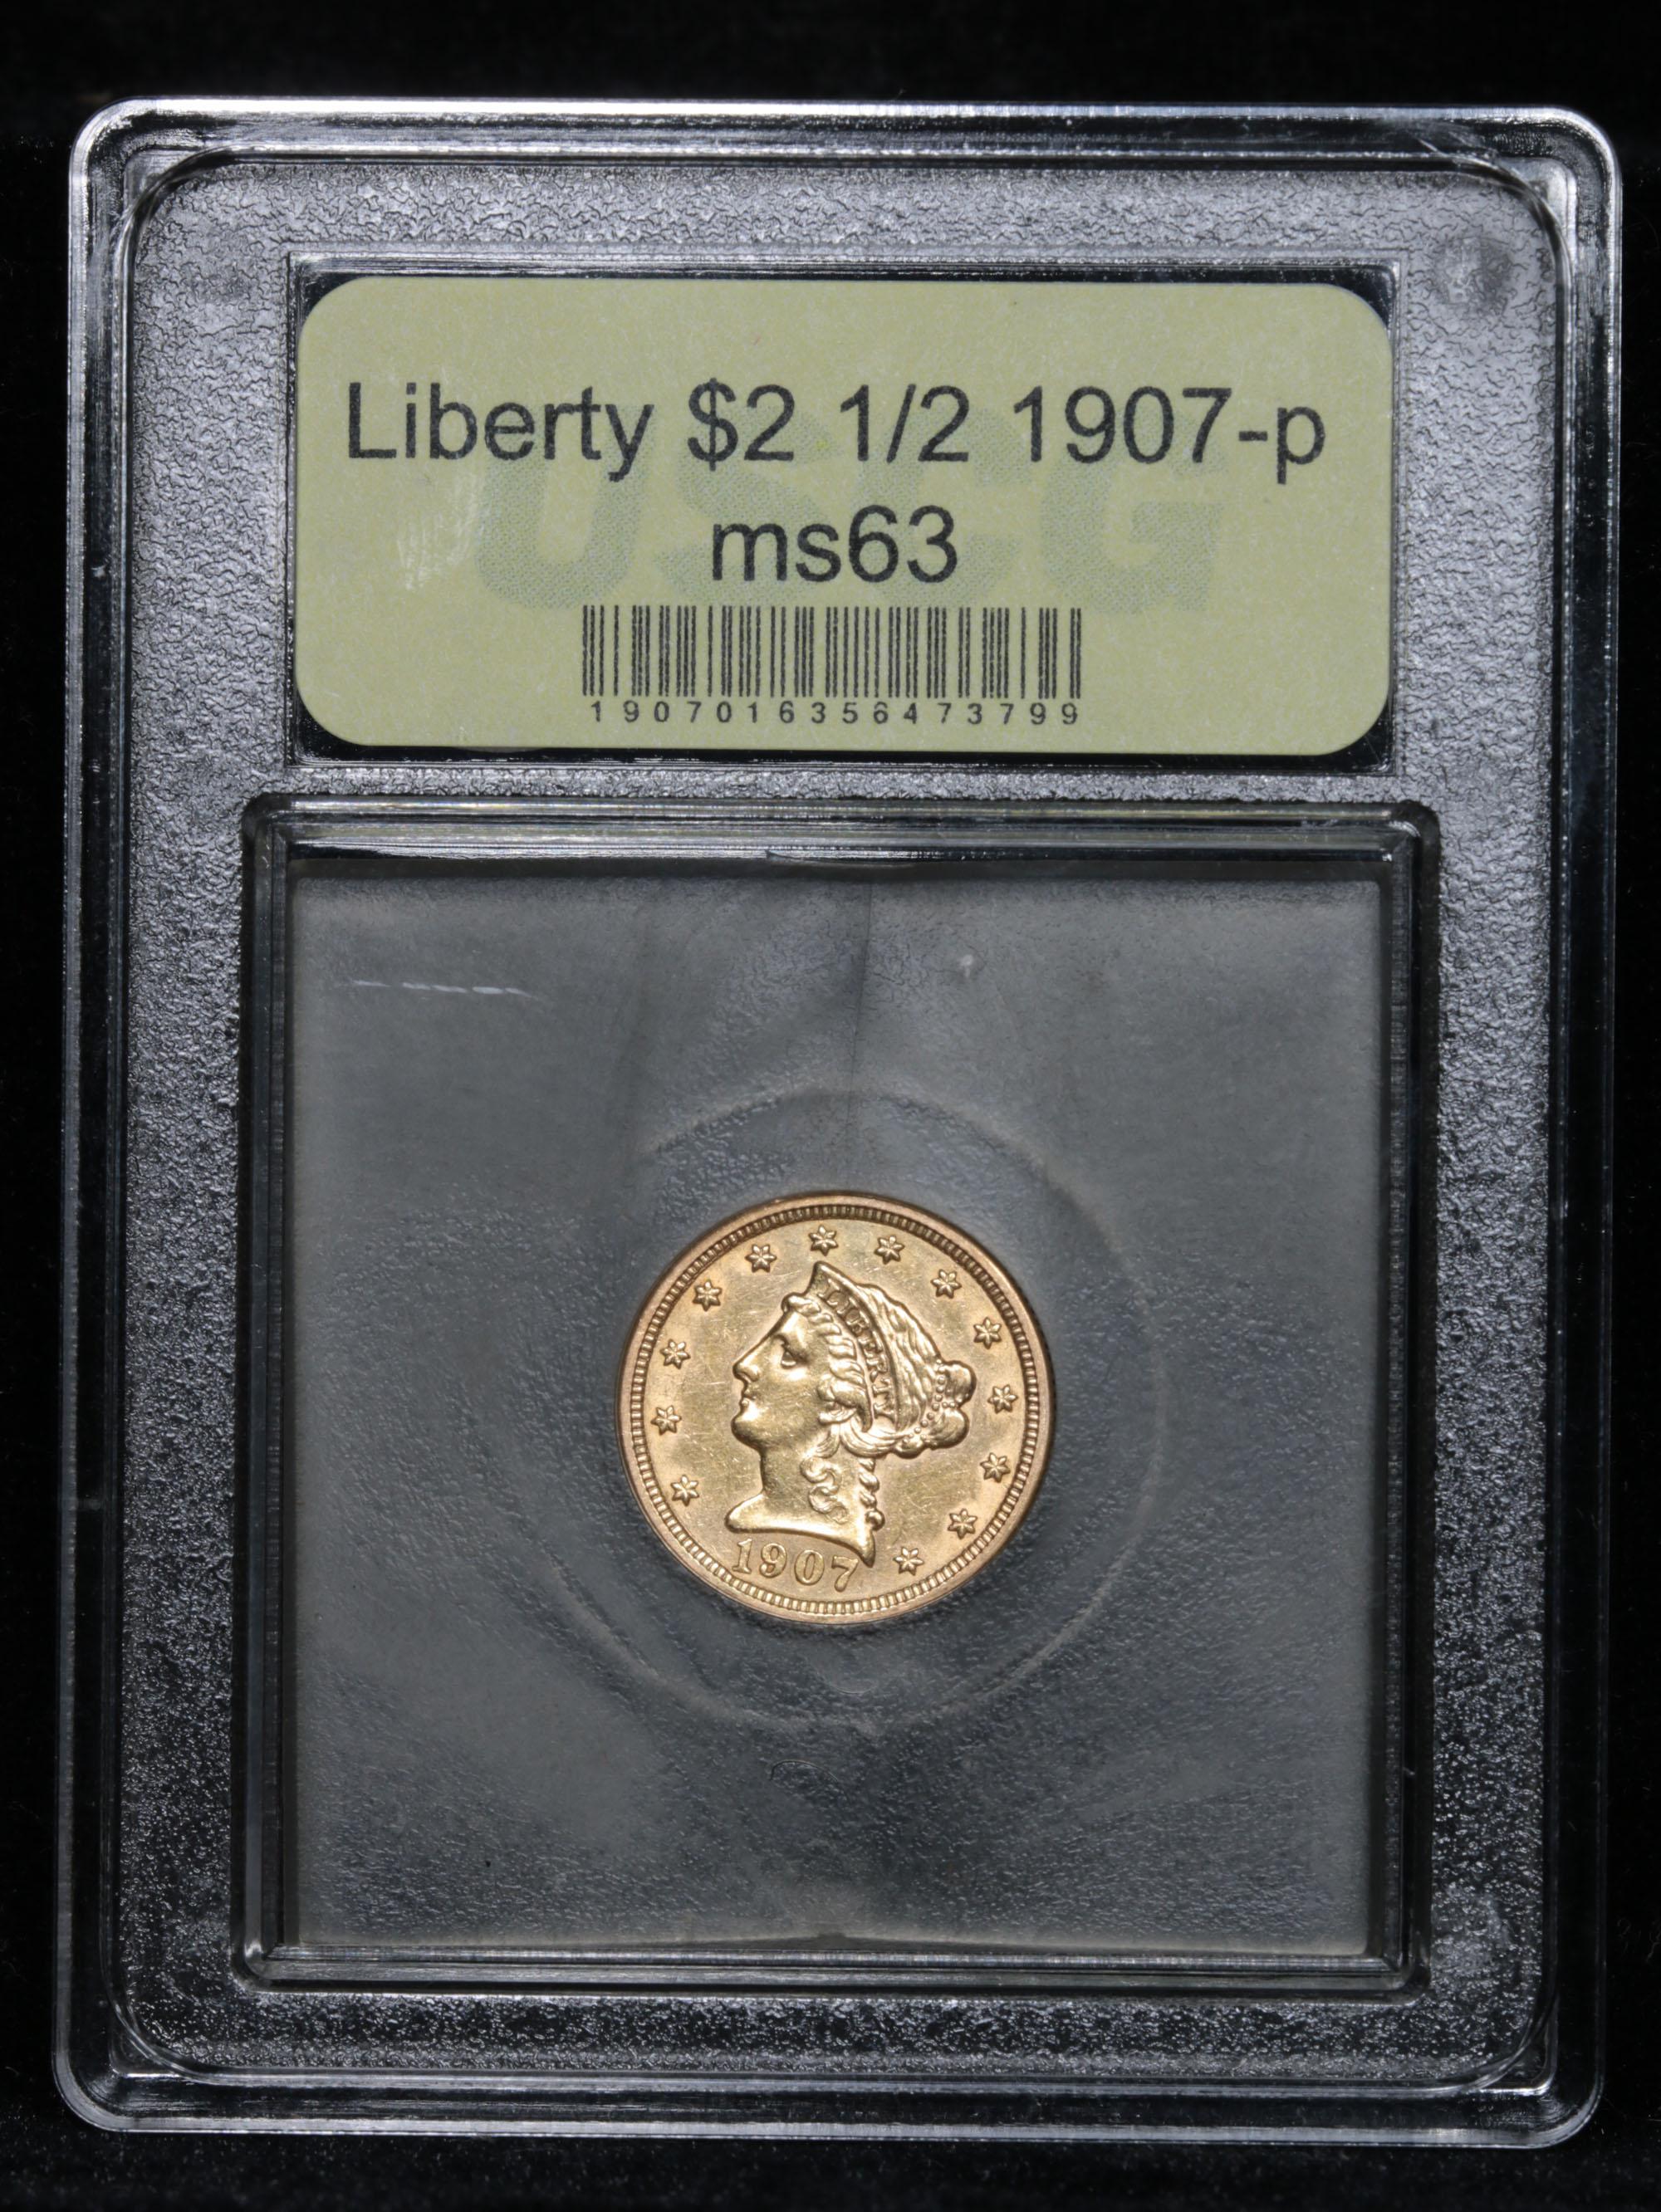 1907-p Gold Liberty Quarter Eagle $2 1/2 Graded Select Unc By USCG